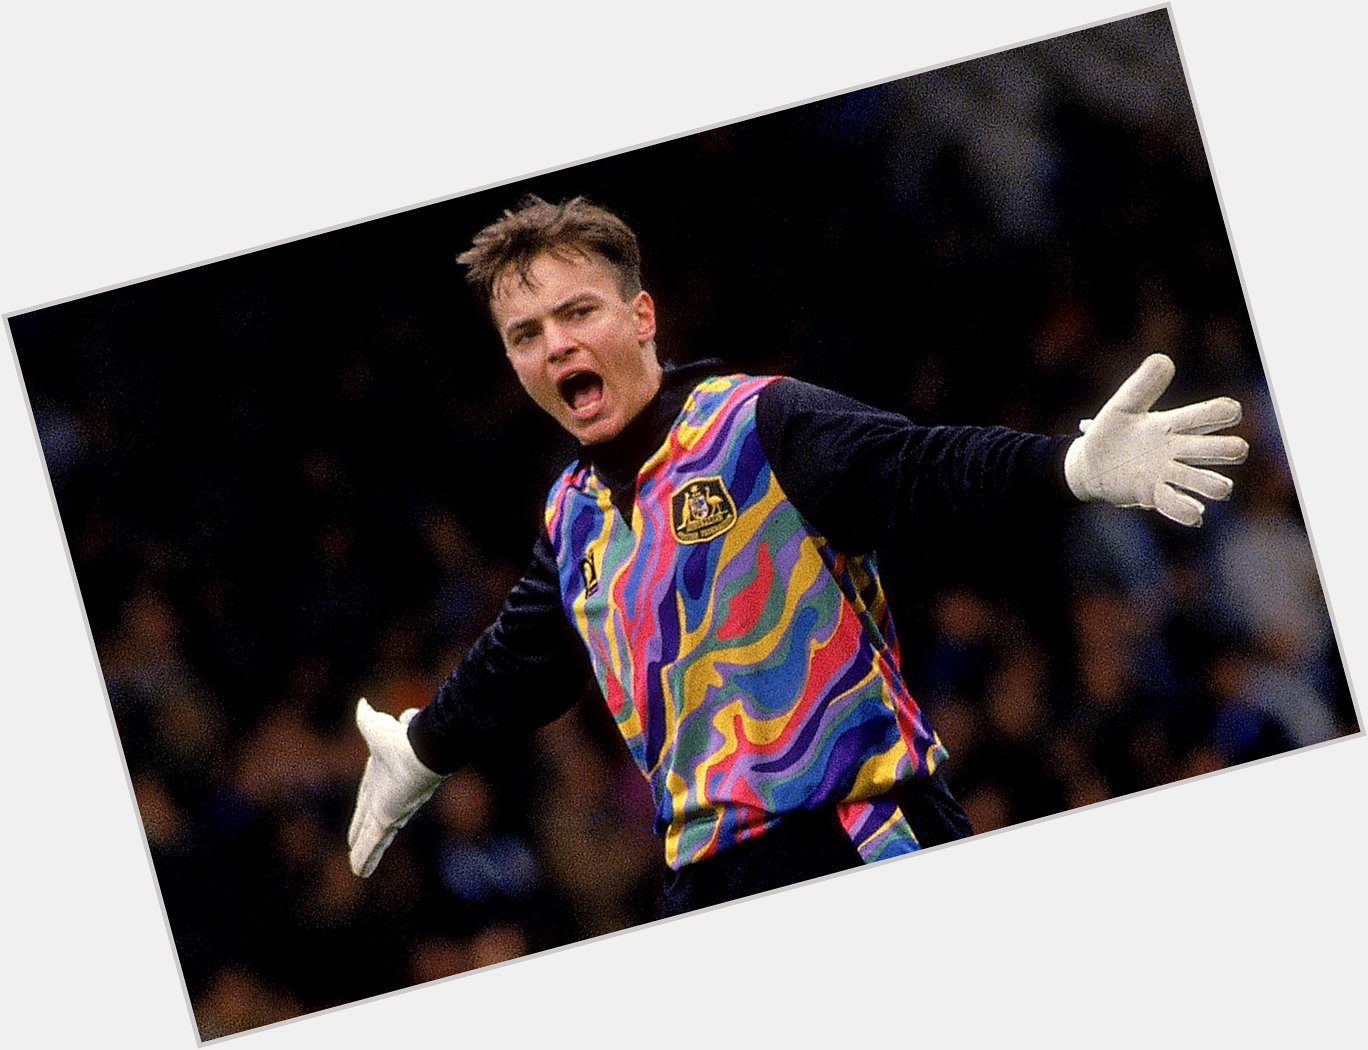 Happy Birthday Mark Bosnich The big man wore some of our favourite GK shirts playing for the Socceroos  